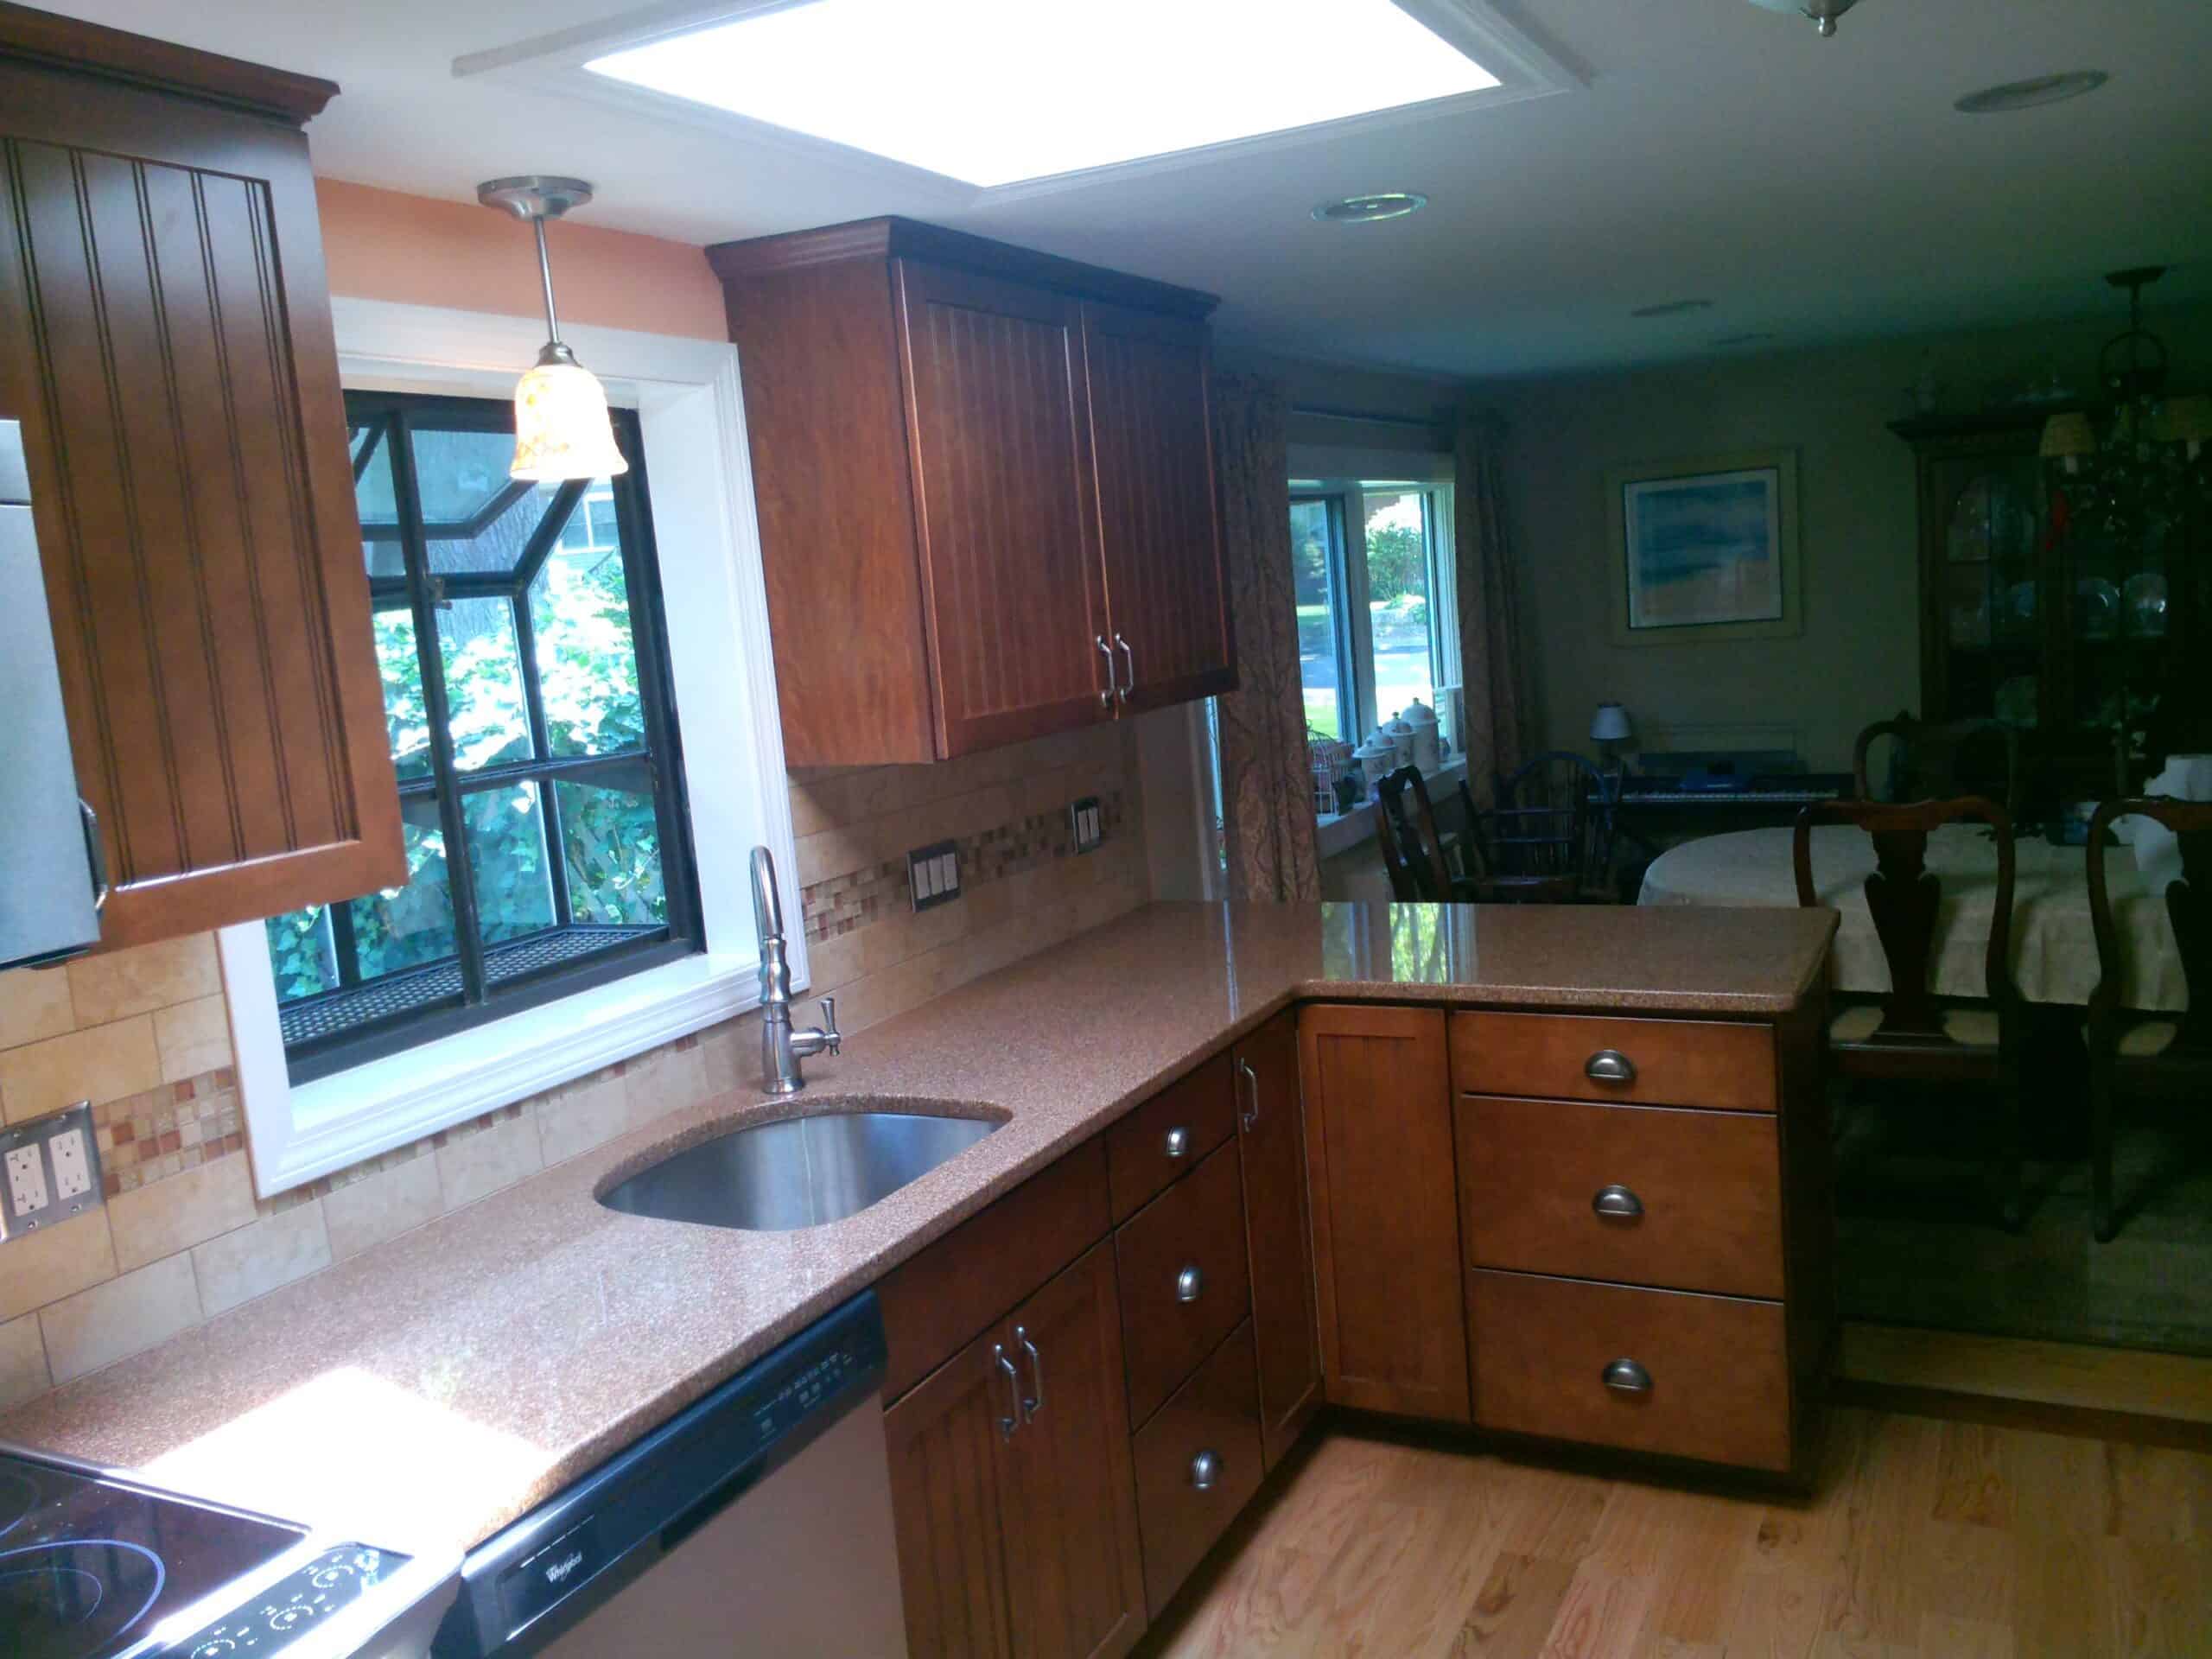 Kitchen Remodeling service from McNeill & Son